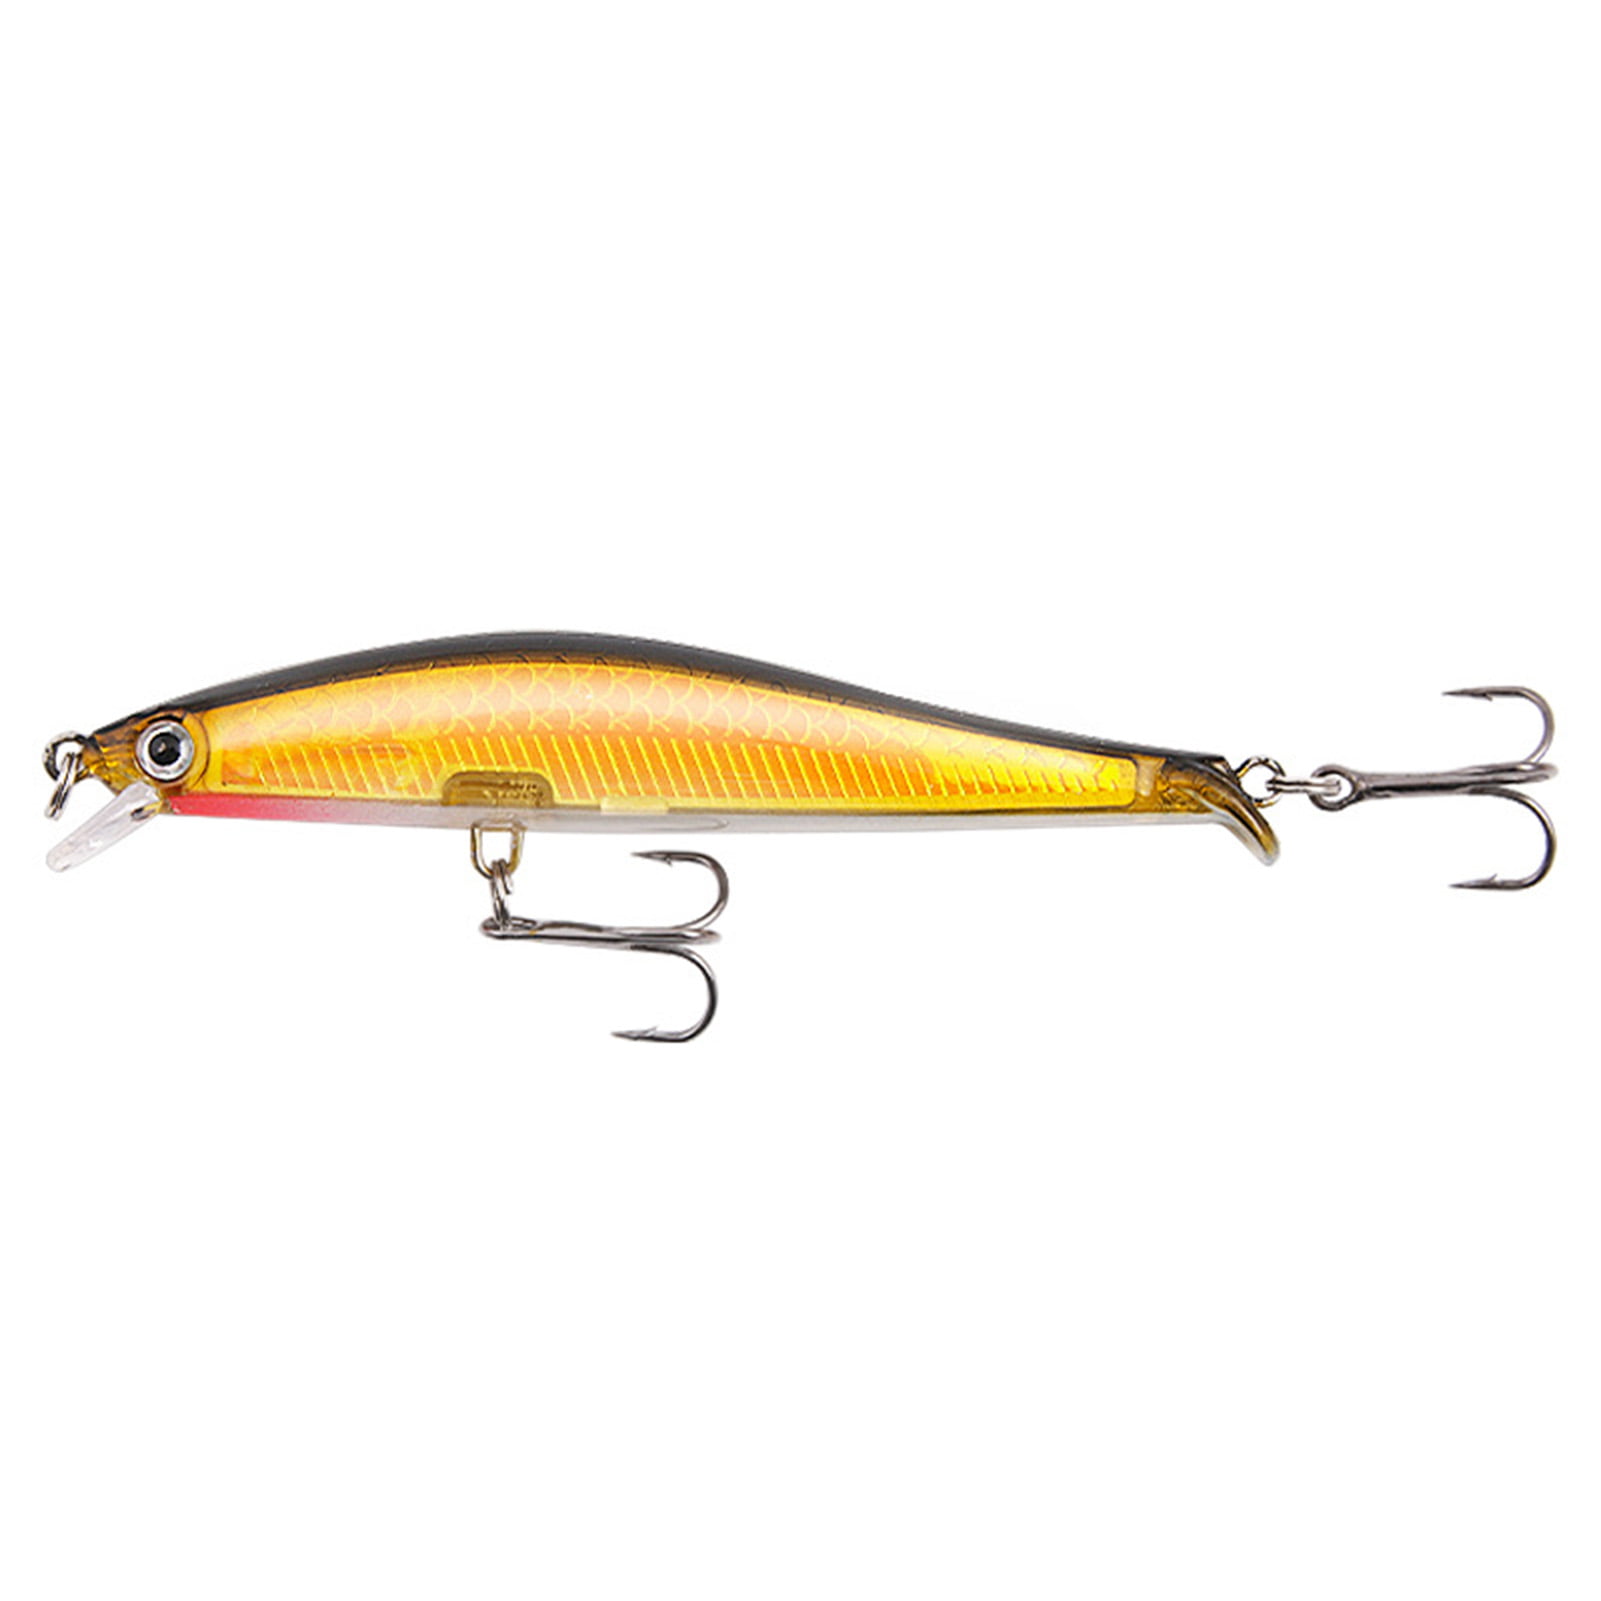 9.5cm/7.5g Barbed Fishing Lure Far Throwing 3d Eyes Bright Color Minnow  Baits Fishing Tool